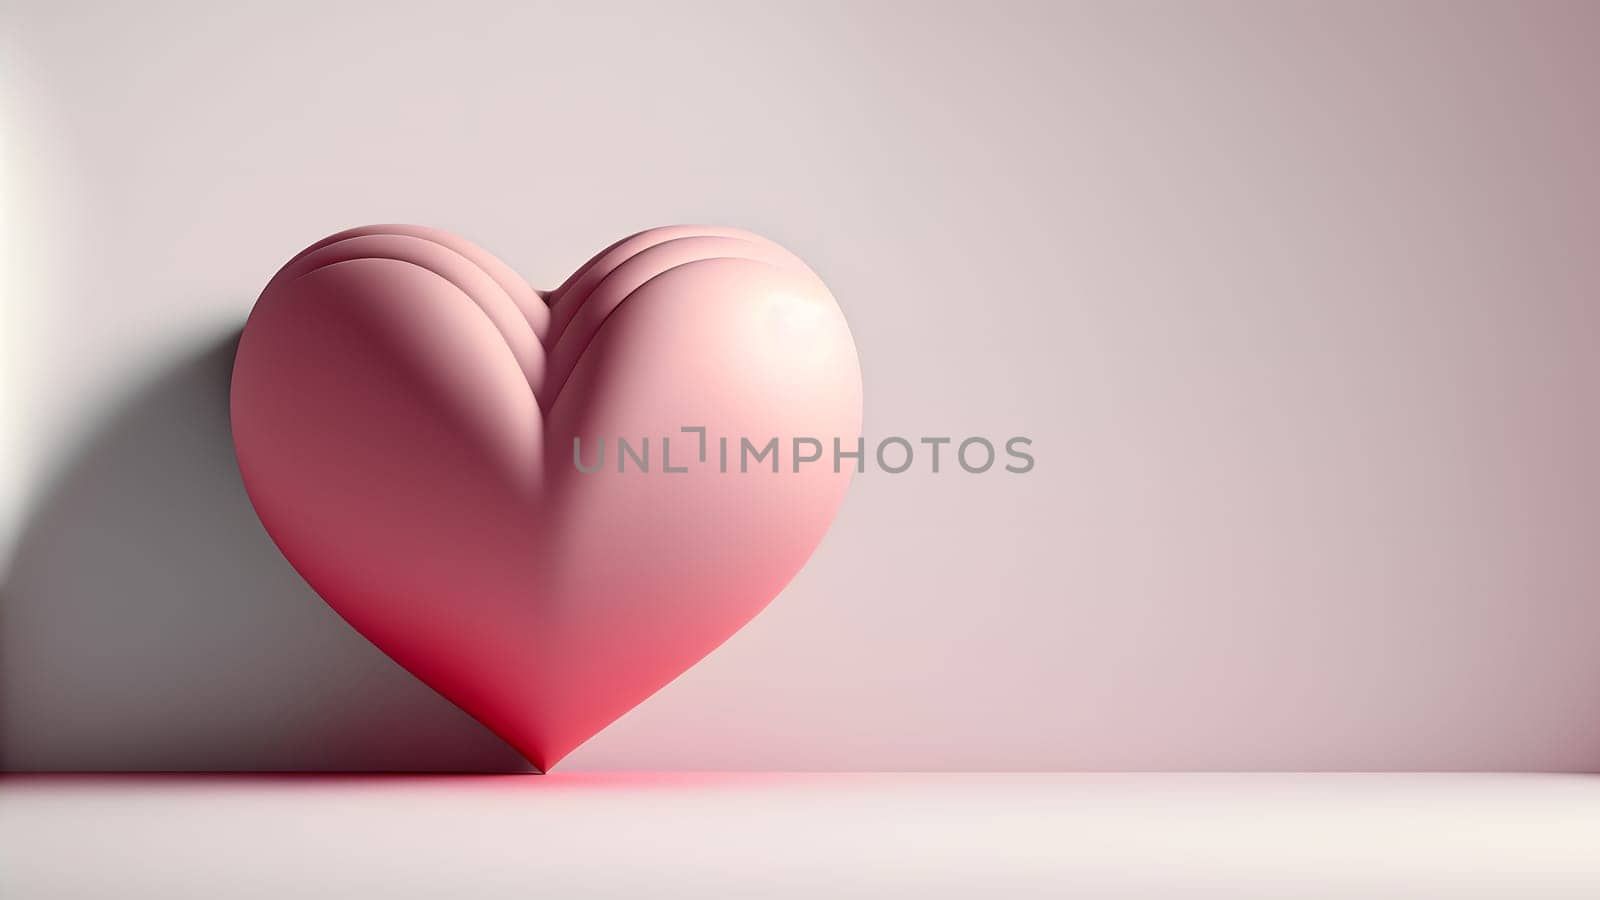 minimalistic valentines day background with heart symbol and copy space, neural network generated art by z1b